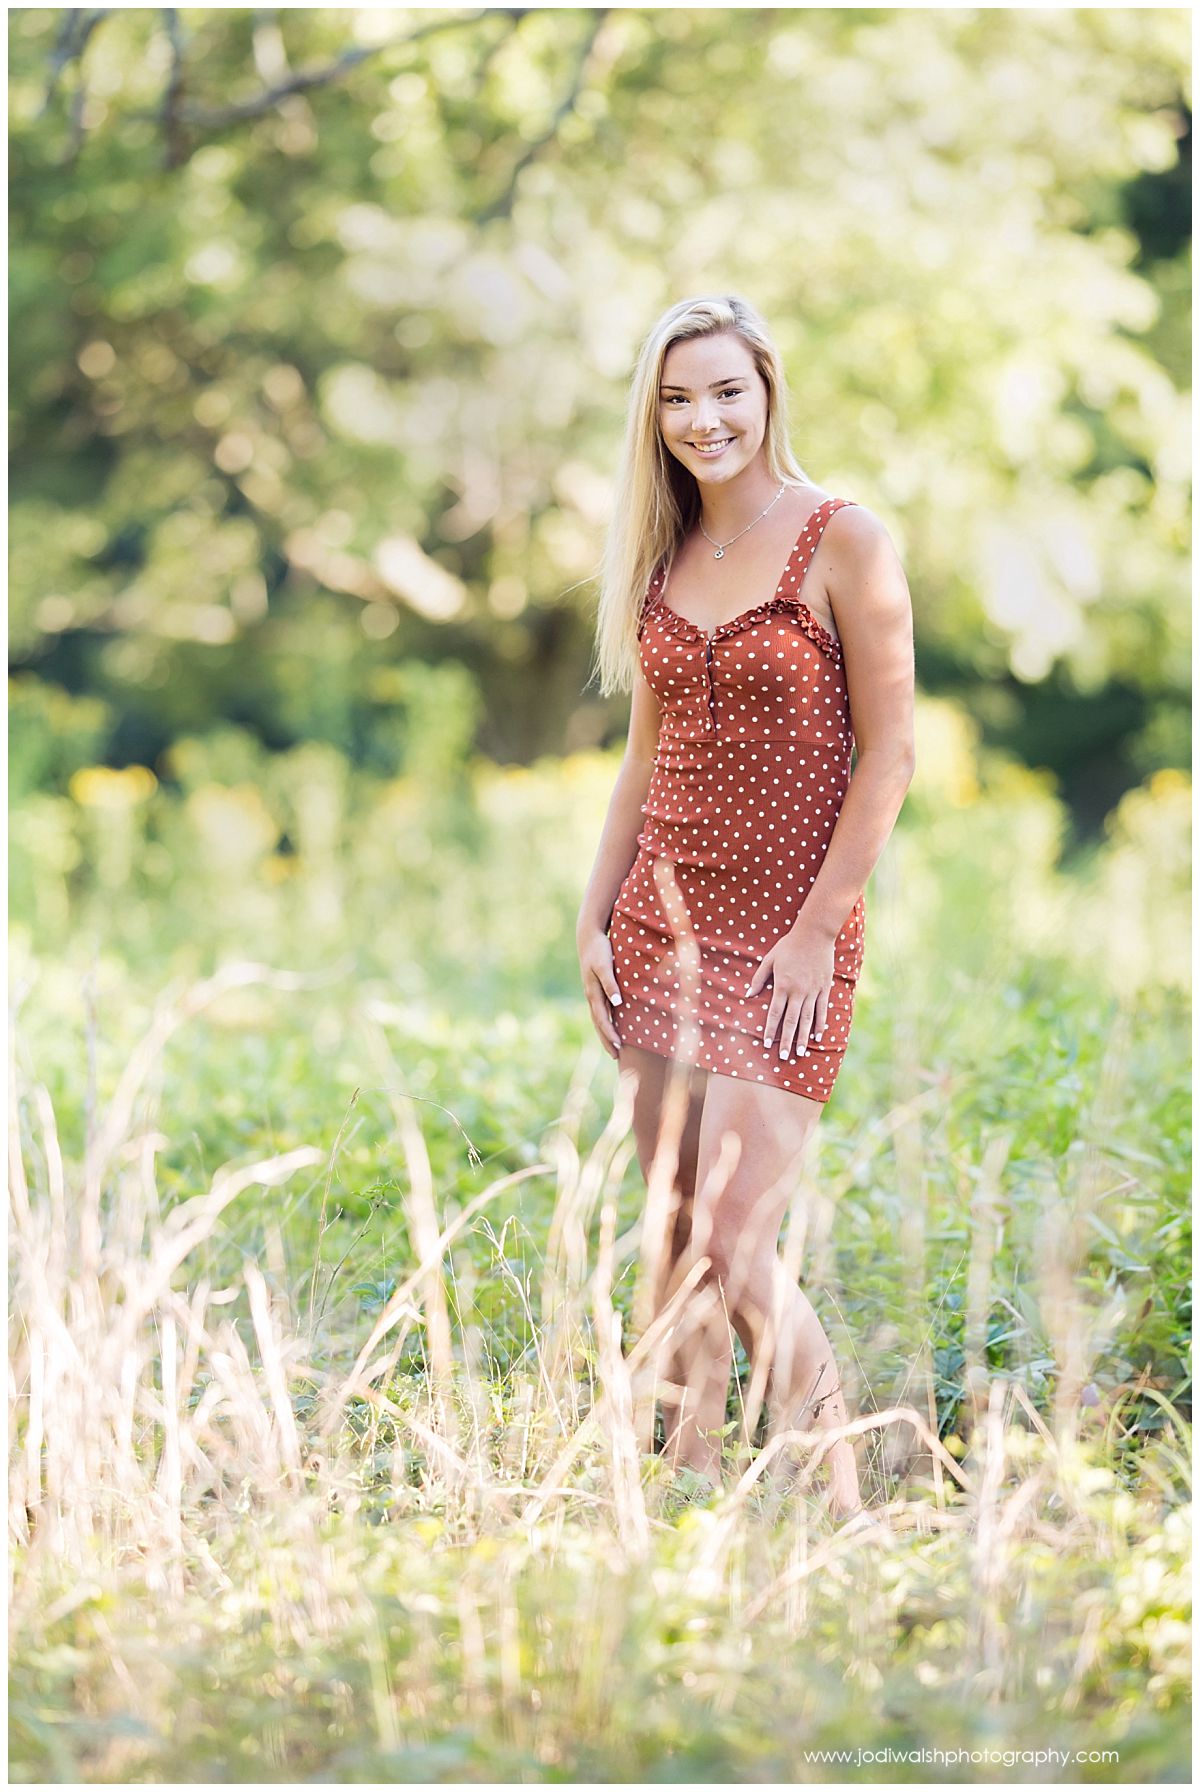 Image of a senior girl in North Park. She's wearing a rust colored polka dot dress and standing in the tall grass, smiling.